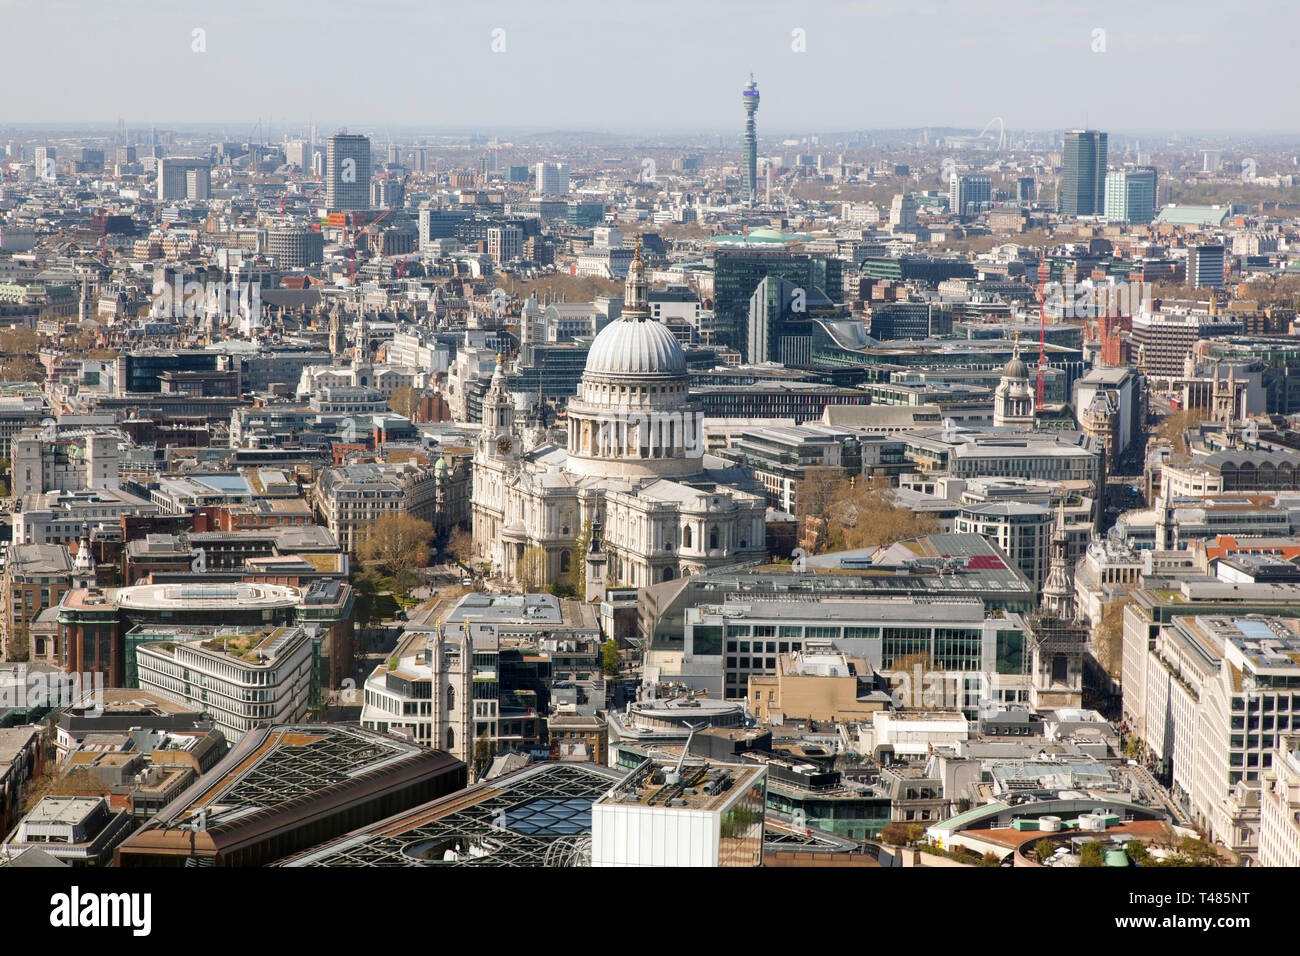 St Paul's cathedral photographed from the Sky Garden, 20 Fenchurch Street, London, England, United Kingdom. Stock Photo